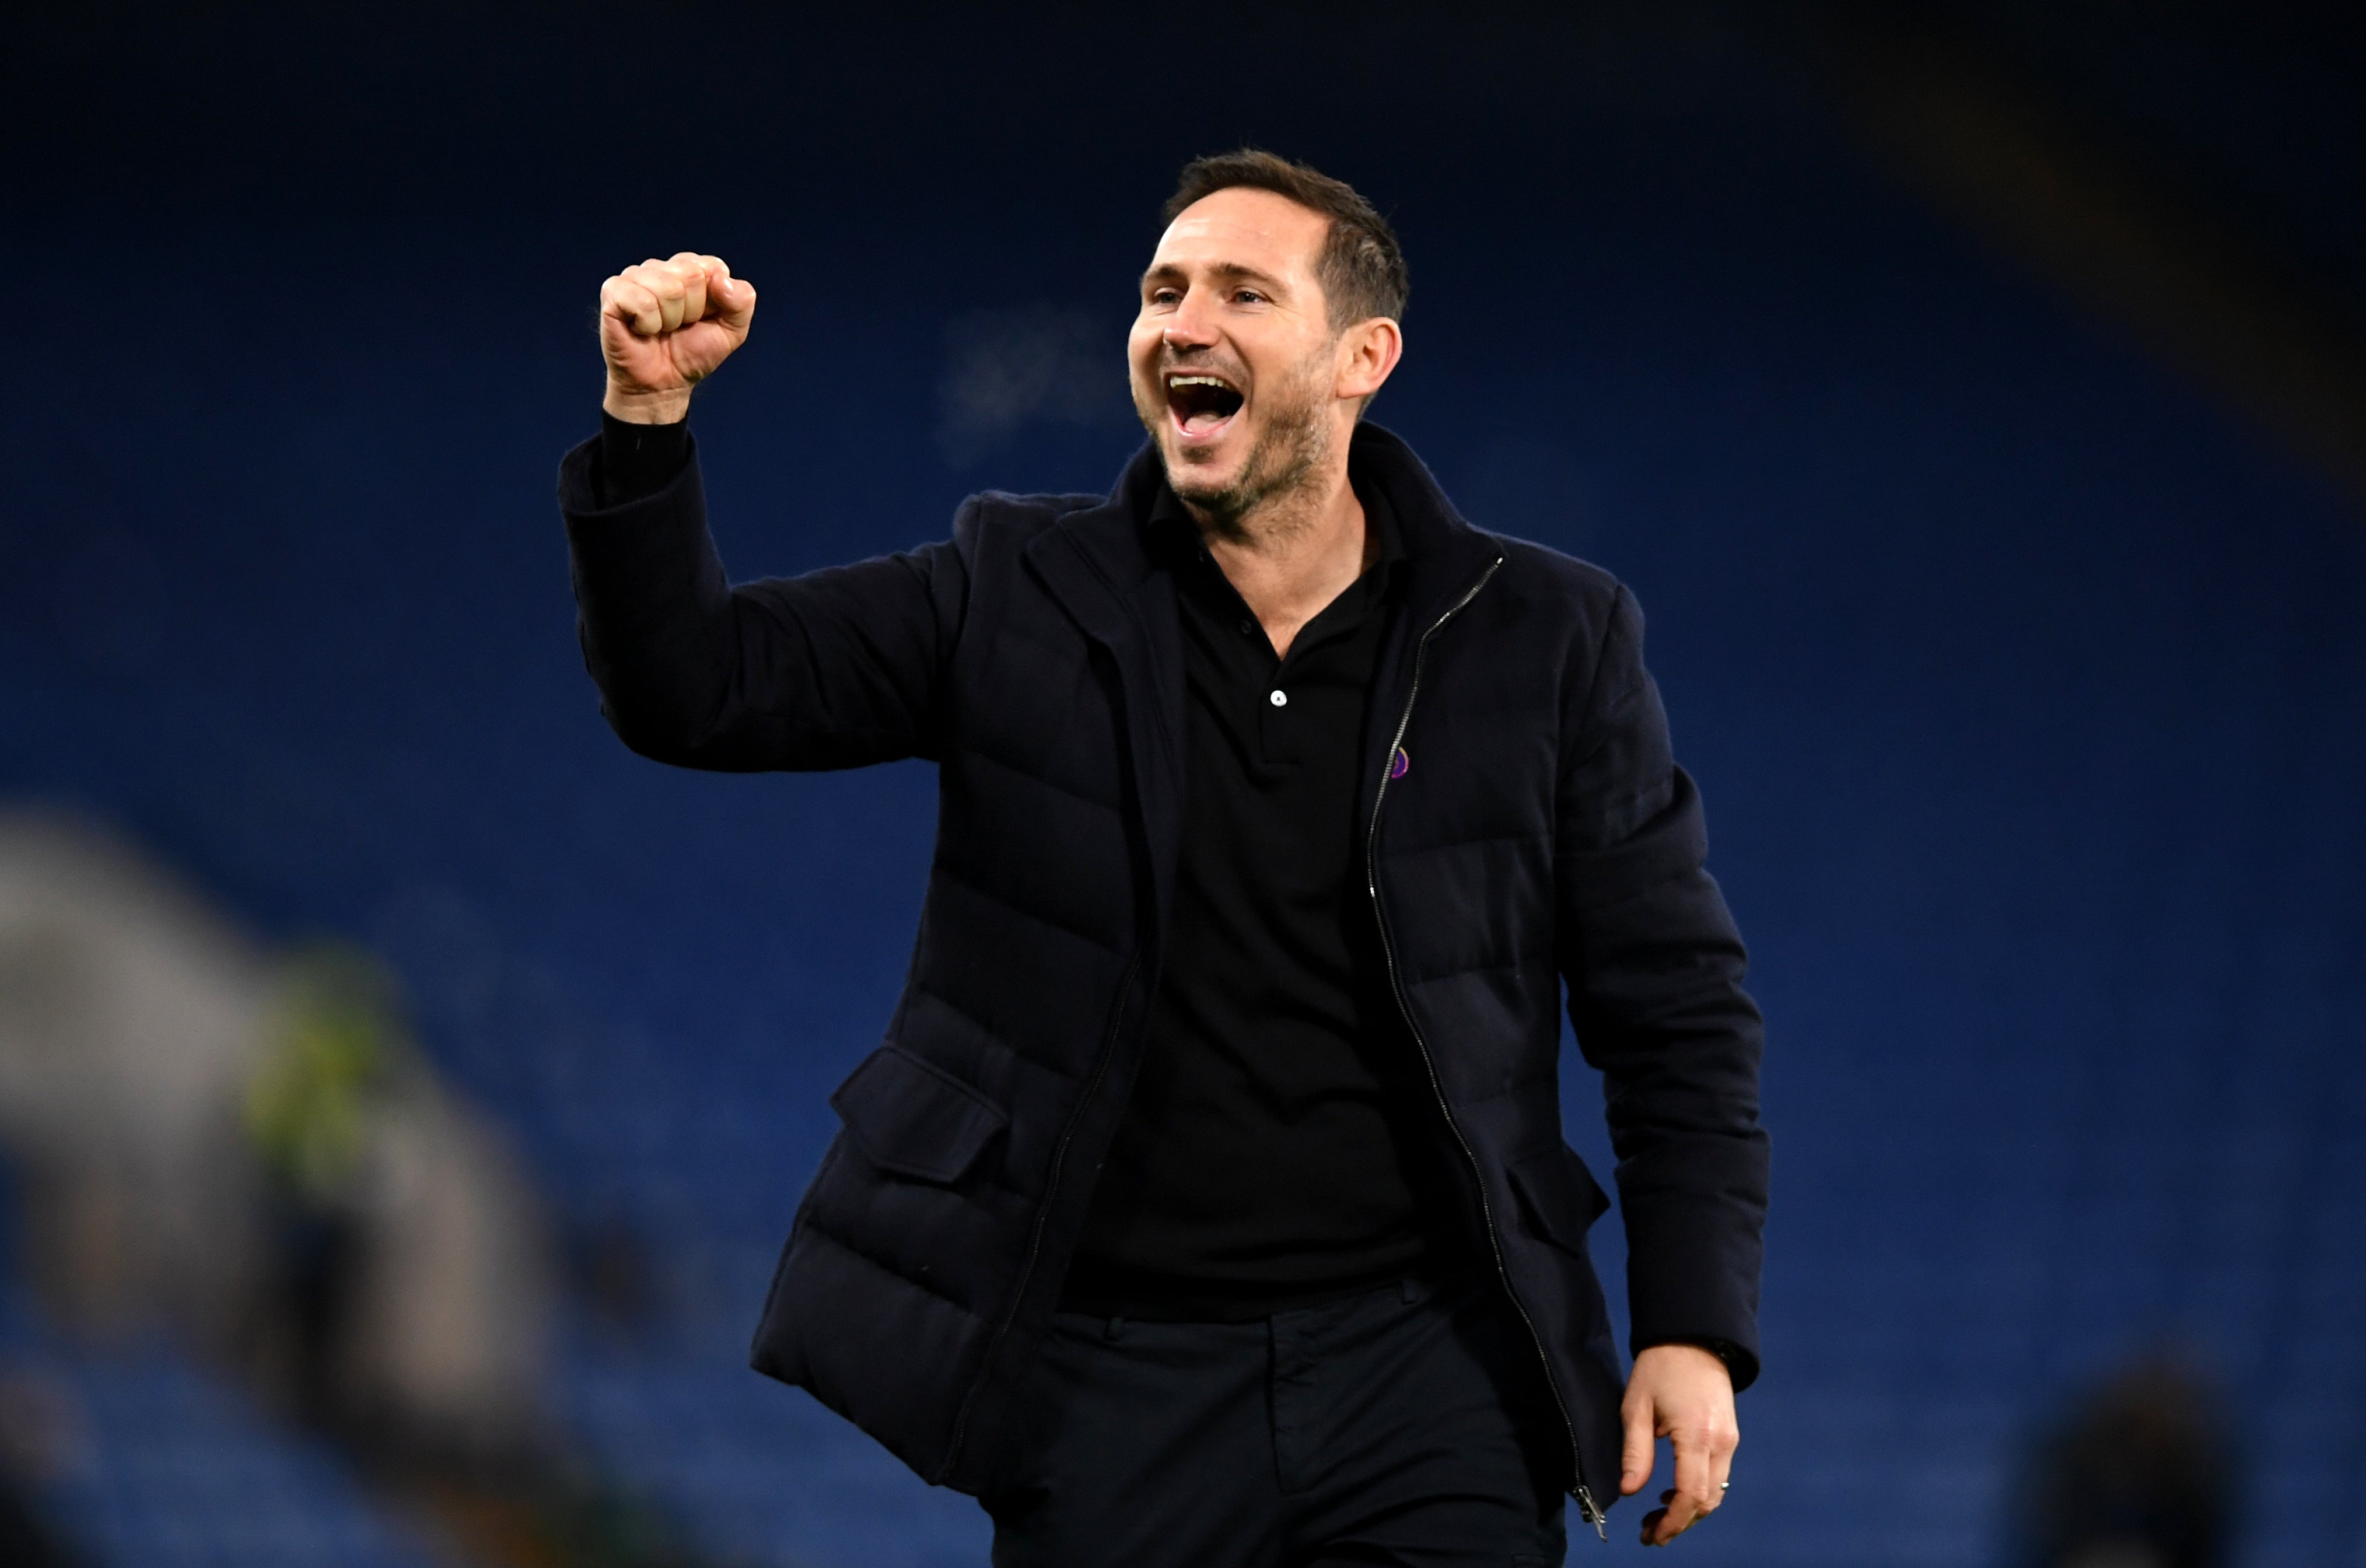 Lampard will hope to lift the mood at Goodison Park (Daniel Leal-Olivas/PA)